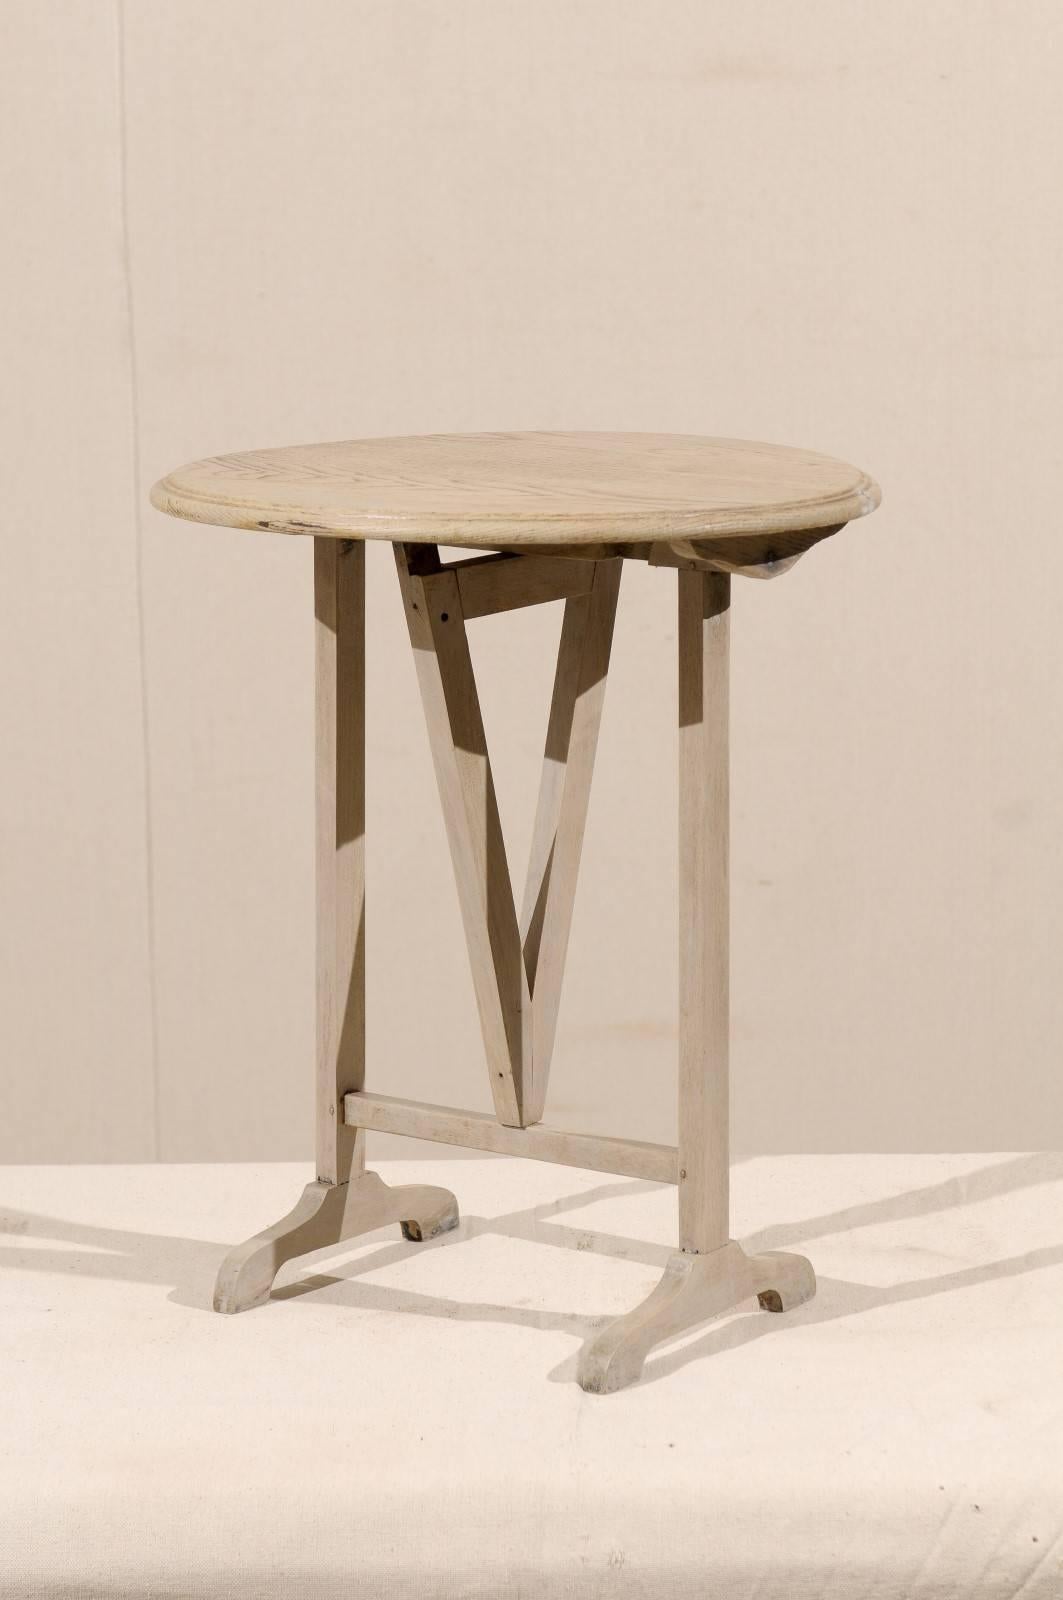 20th Century A Belgian Petite Size Wood Vintage Folding Drink Table with Natural Finish